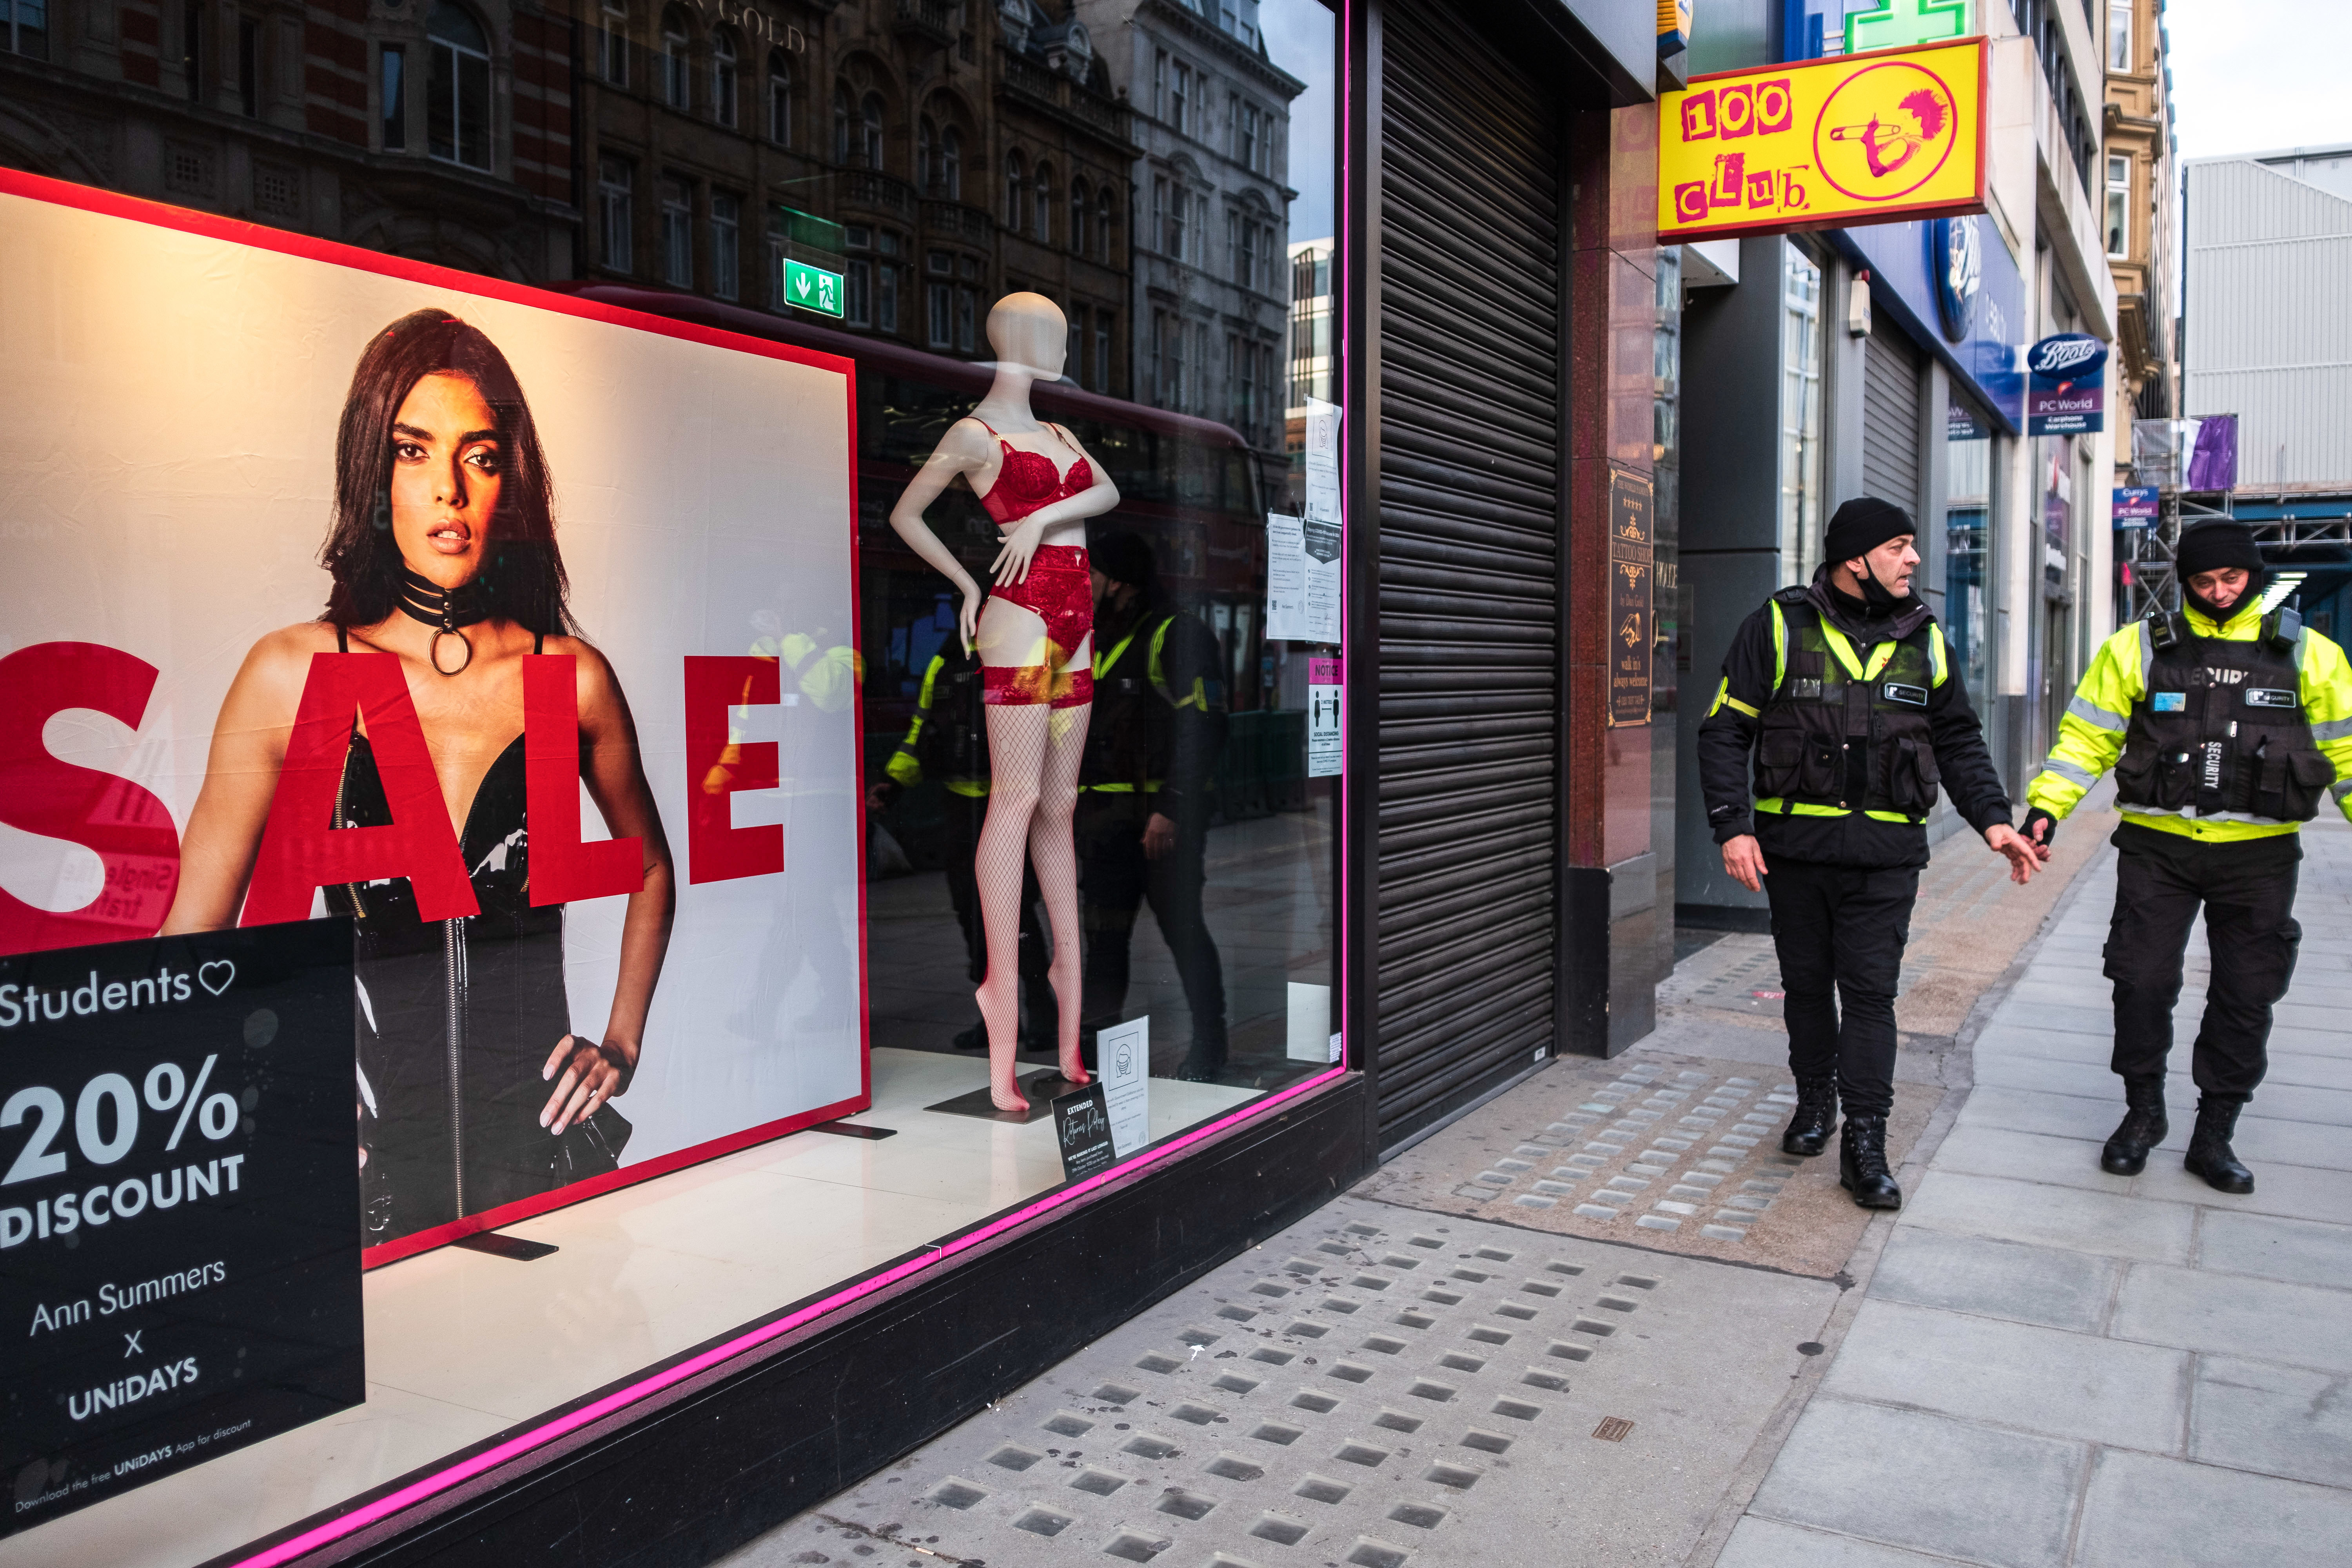 Security guards passing a Sale sign in London. Latest Covid-19 lockdown slams UK business owners. (Photo by May James / SOPA Images/Sipa USA)